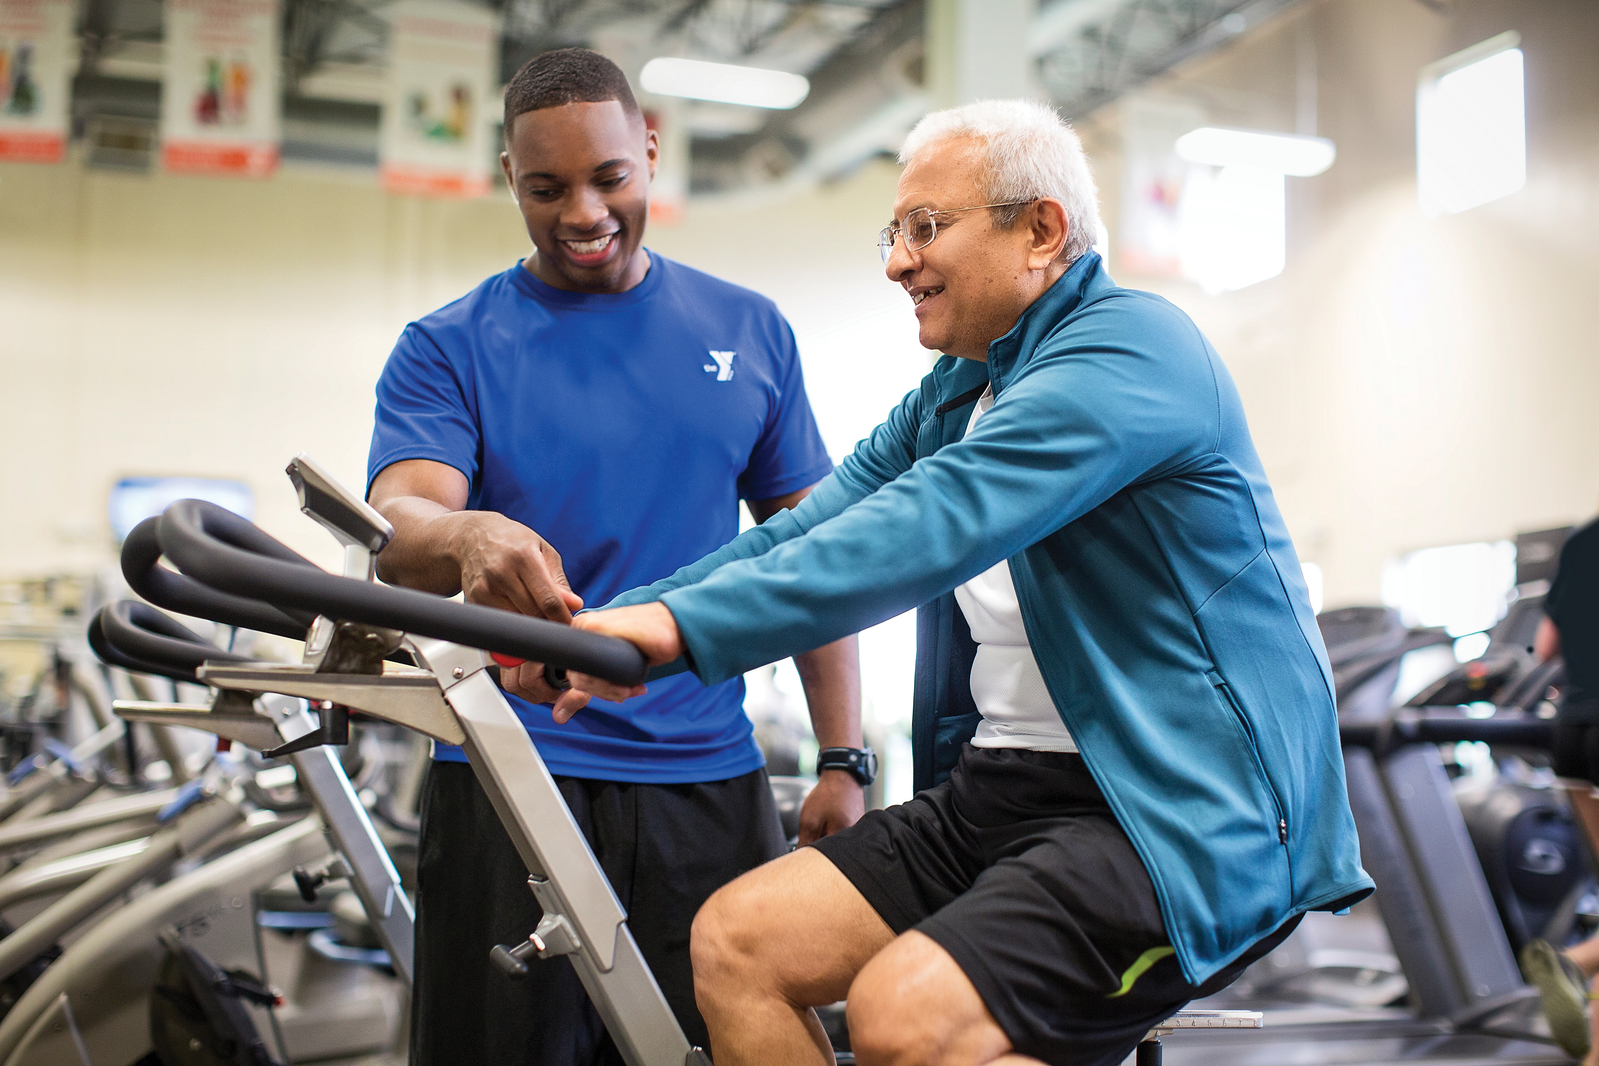 YMCA staff member helping out a man on a fitness machine.